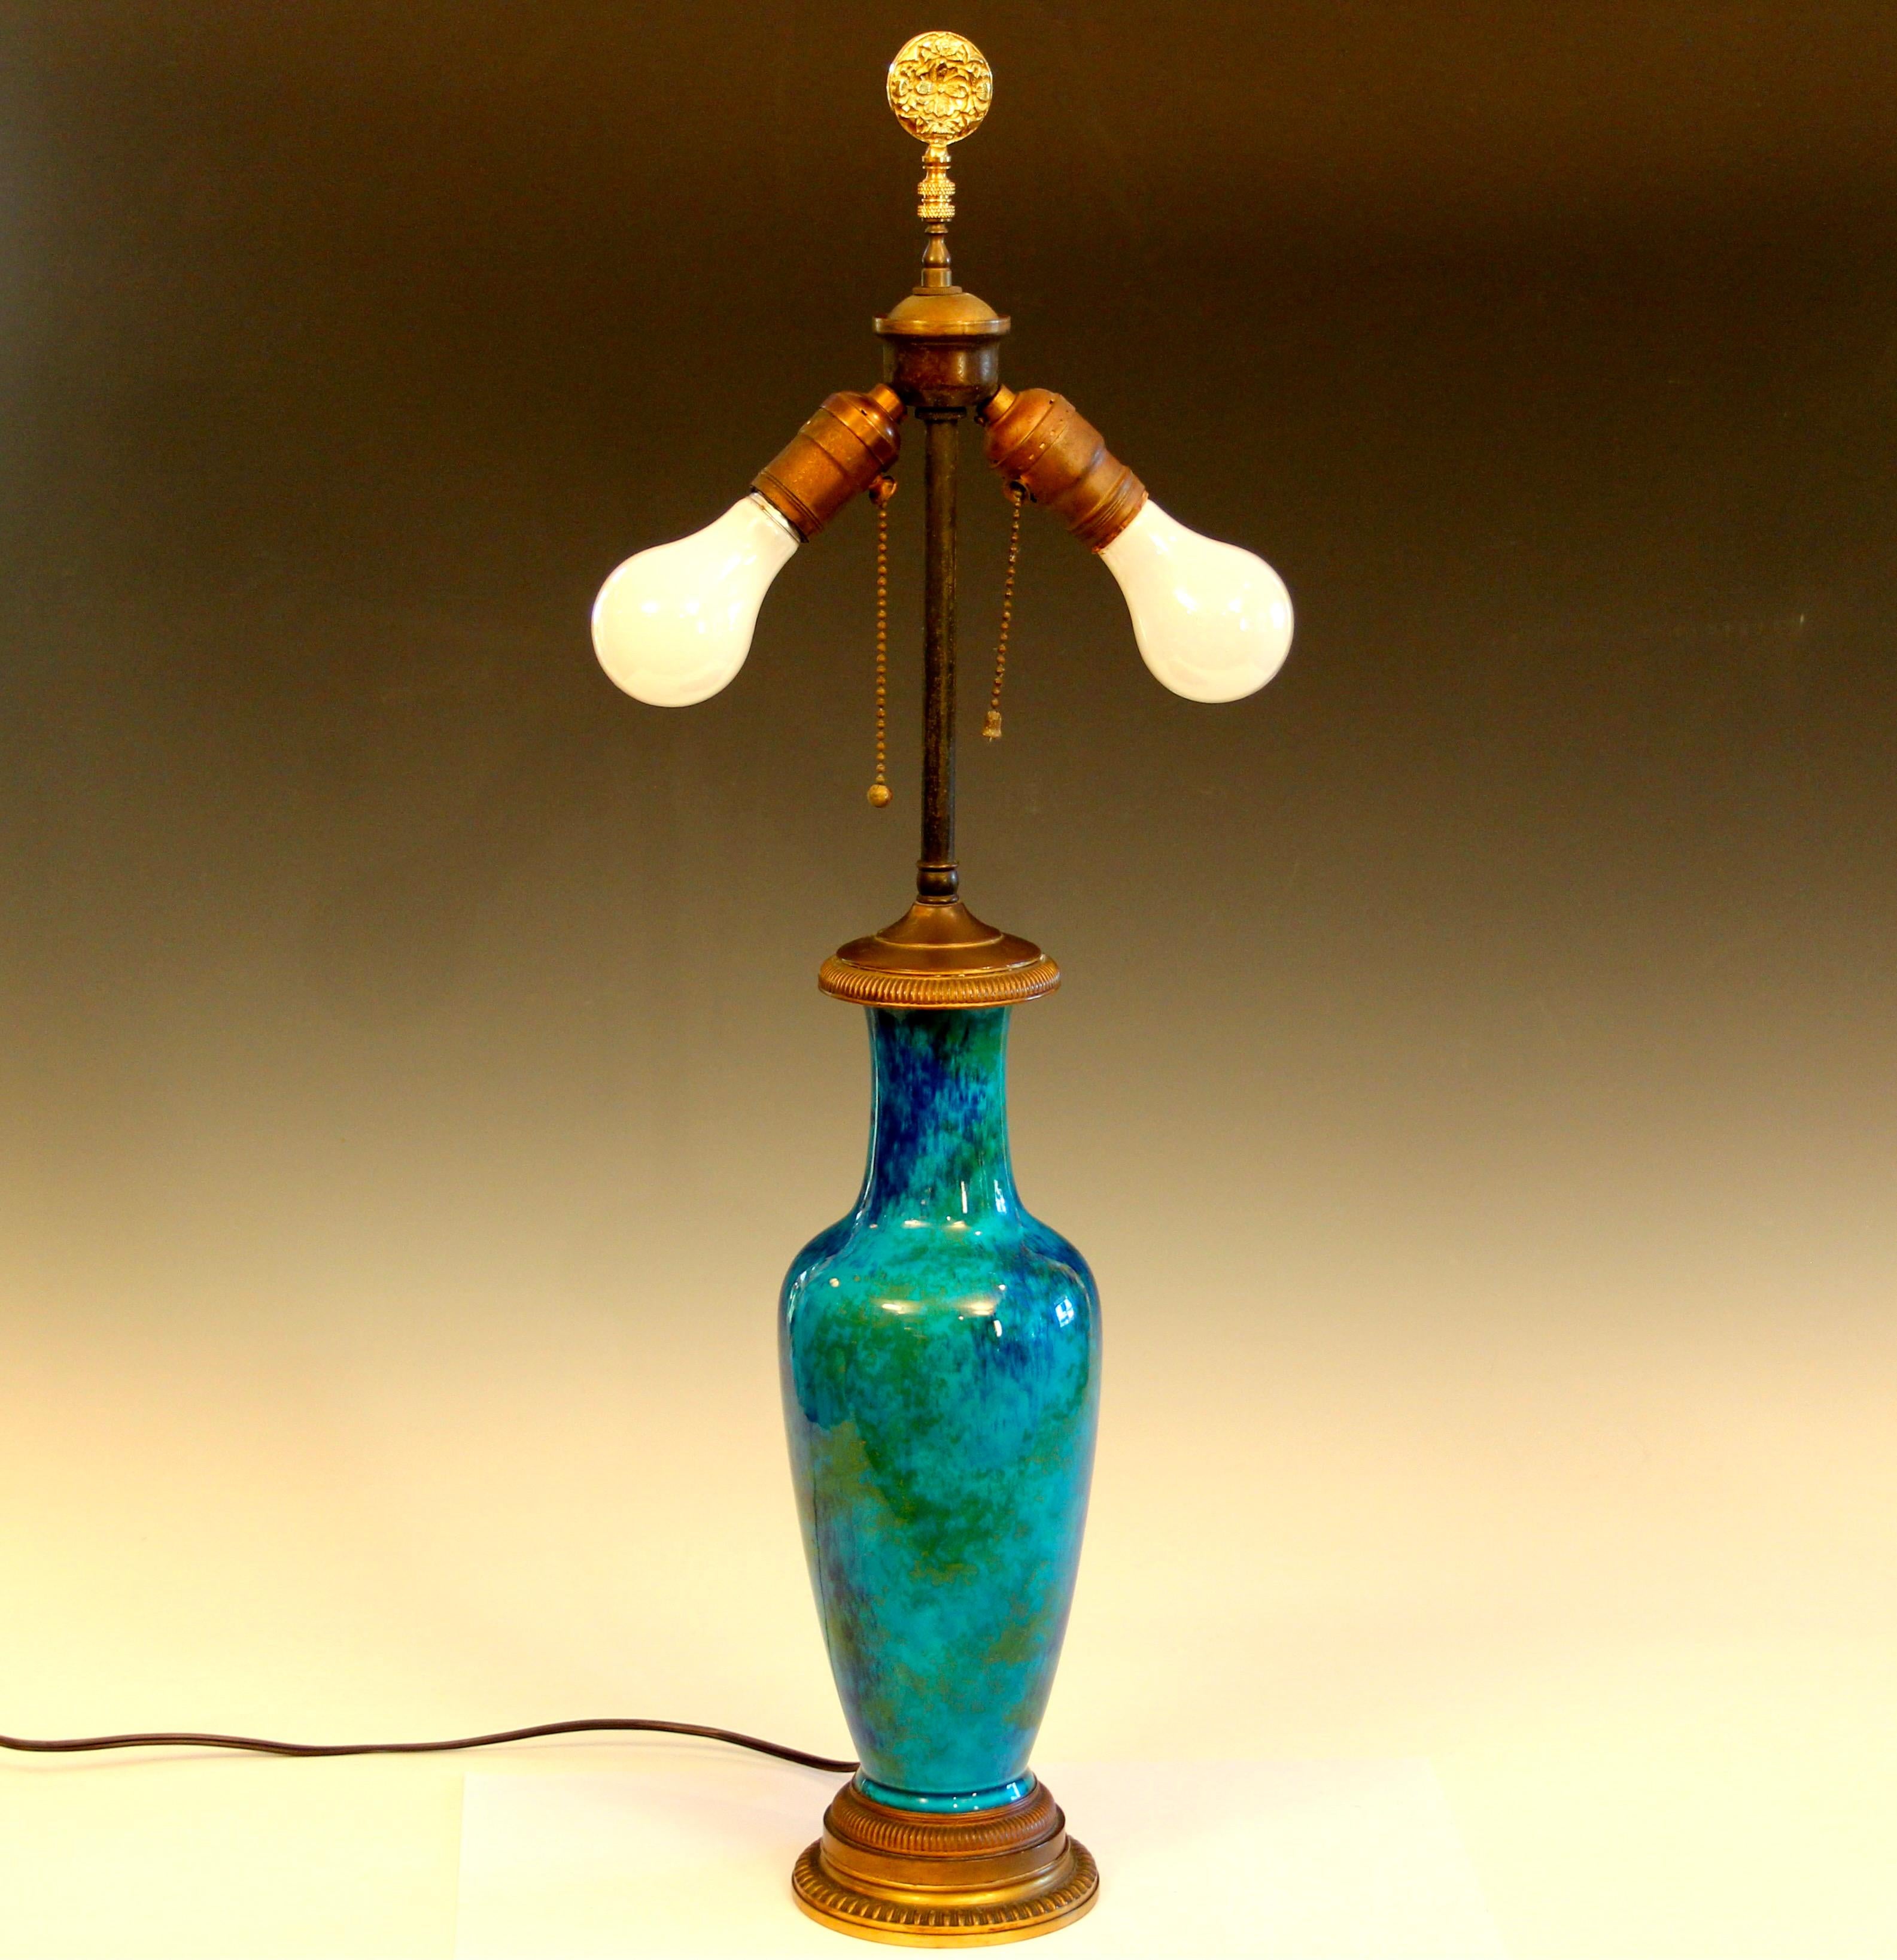 Early 20th Century MP Sevres French Antique Pottery Art Deco Lamp Gilt Bronze D'ore Flambe